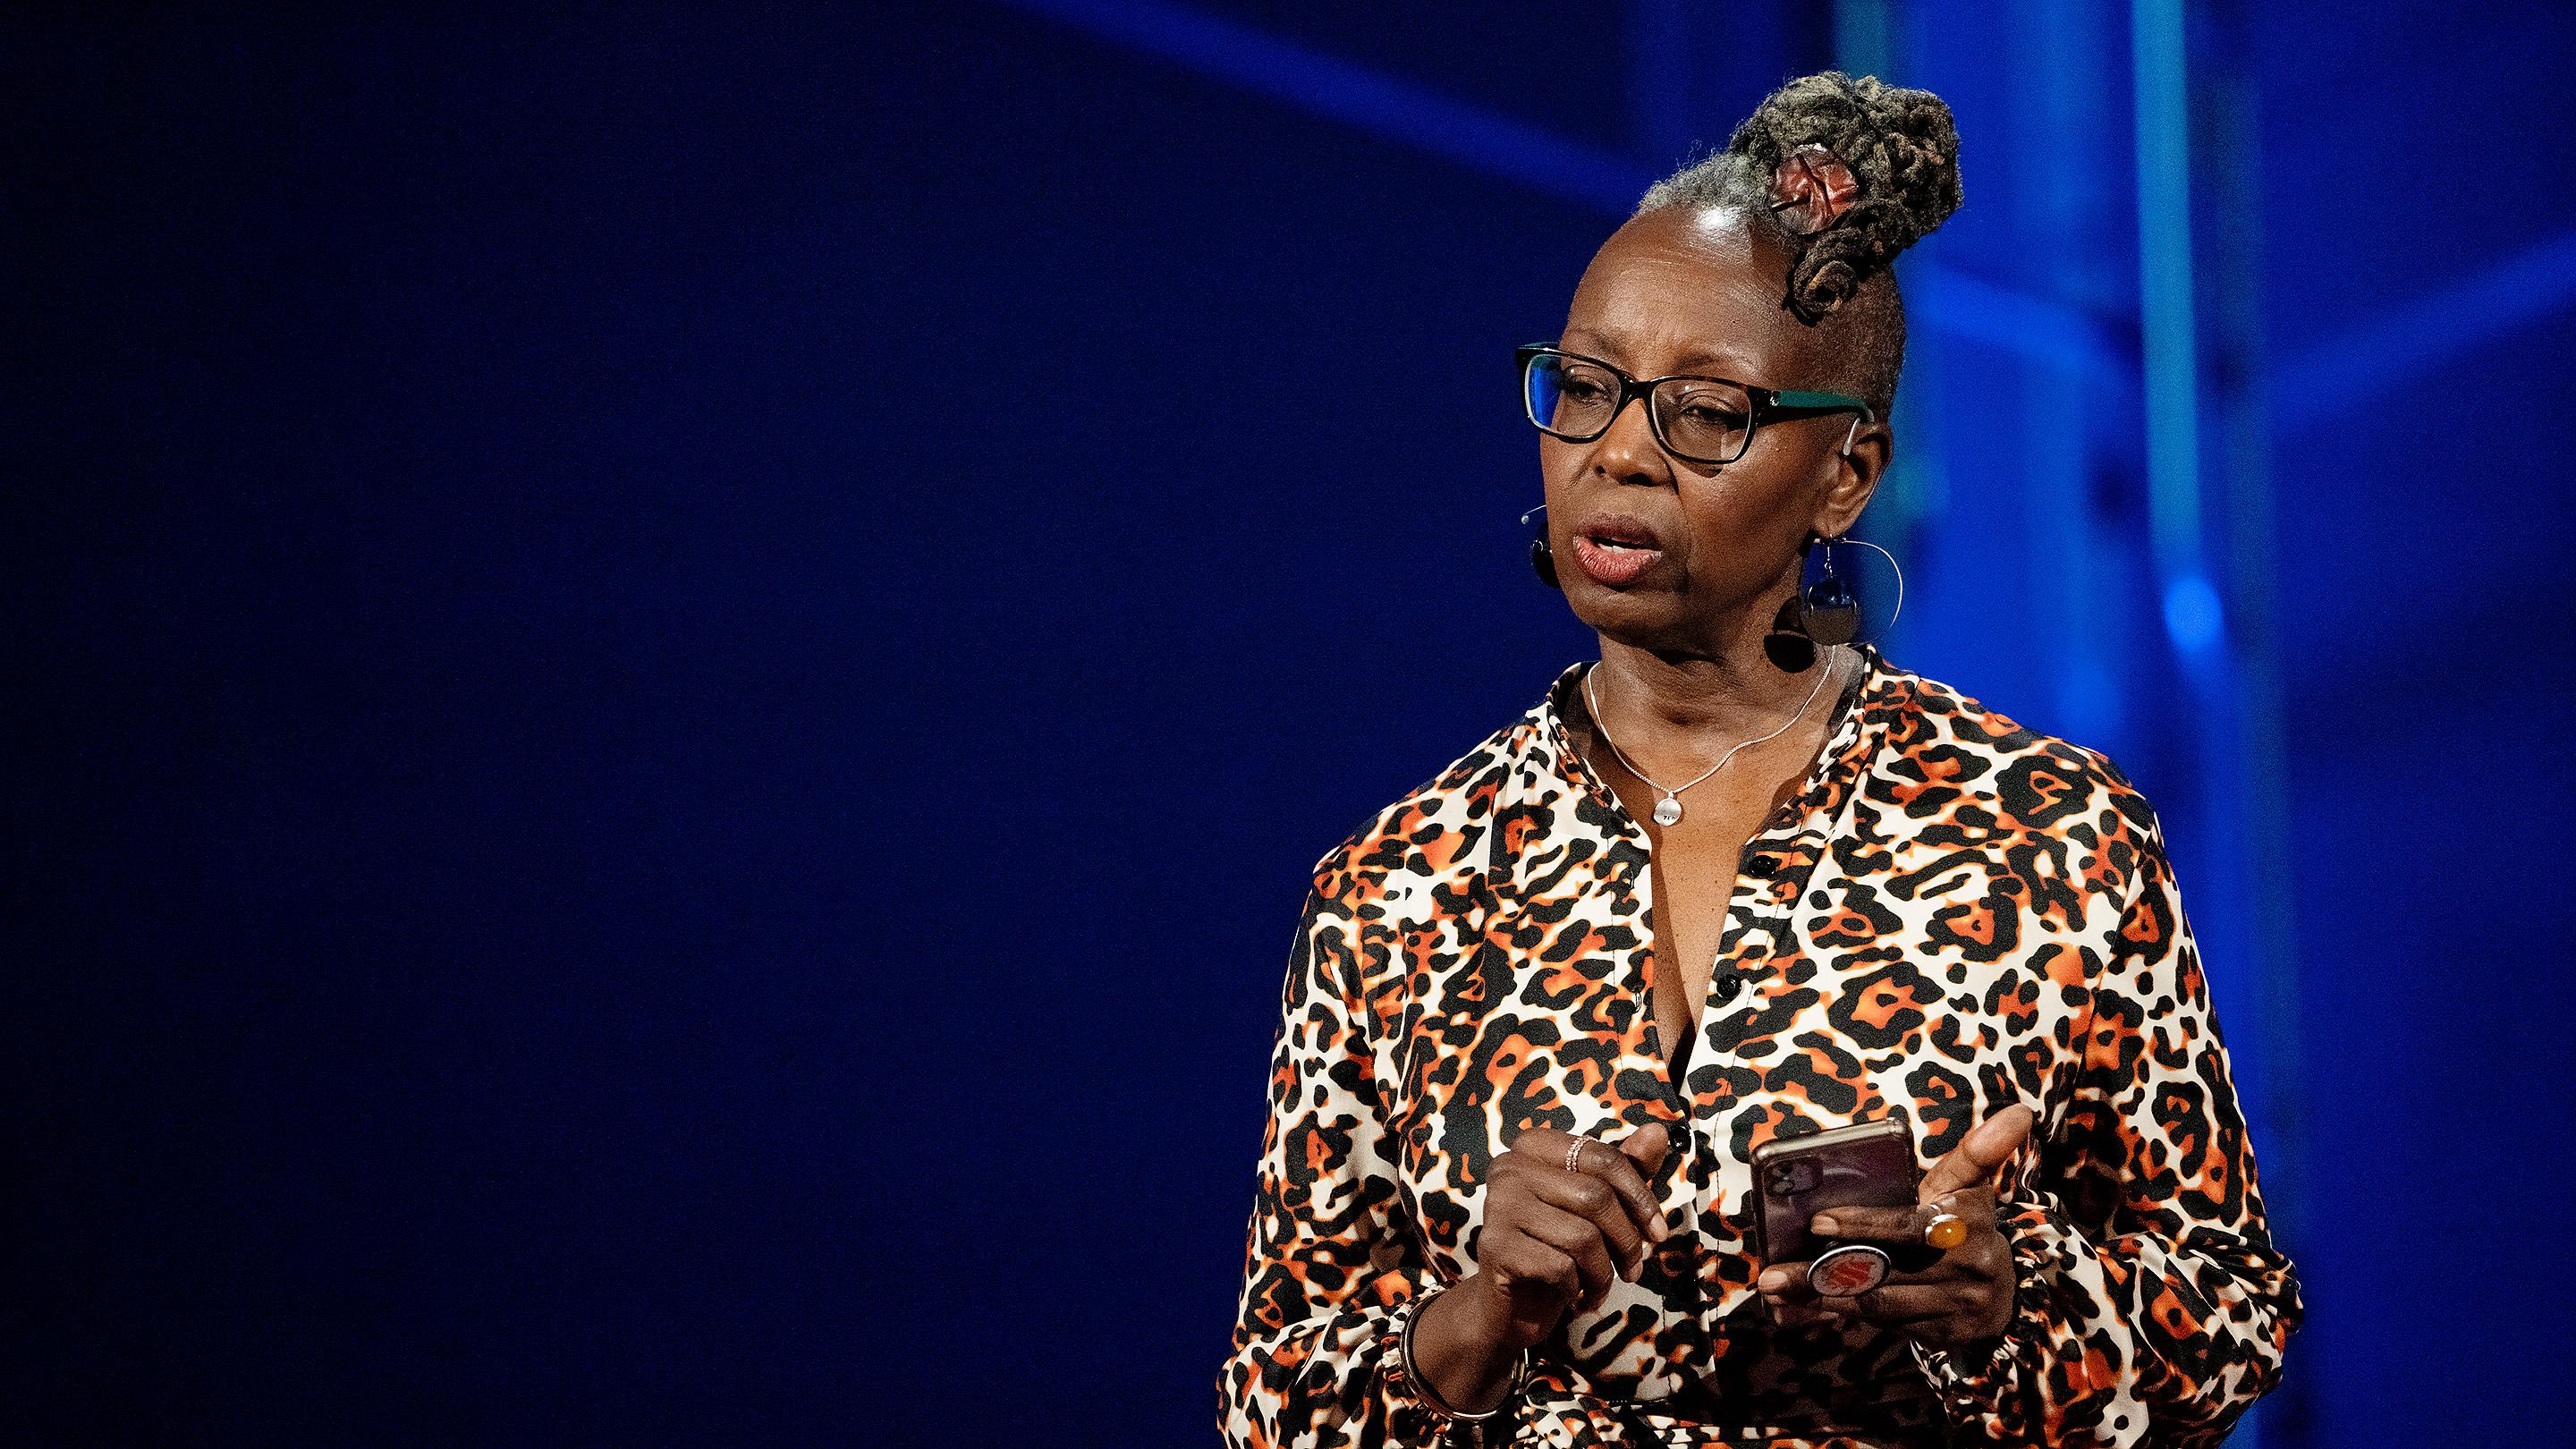 Kyra Gaunt: How Black girls can reclaim their voice in music | TED Talk